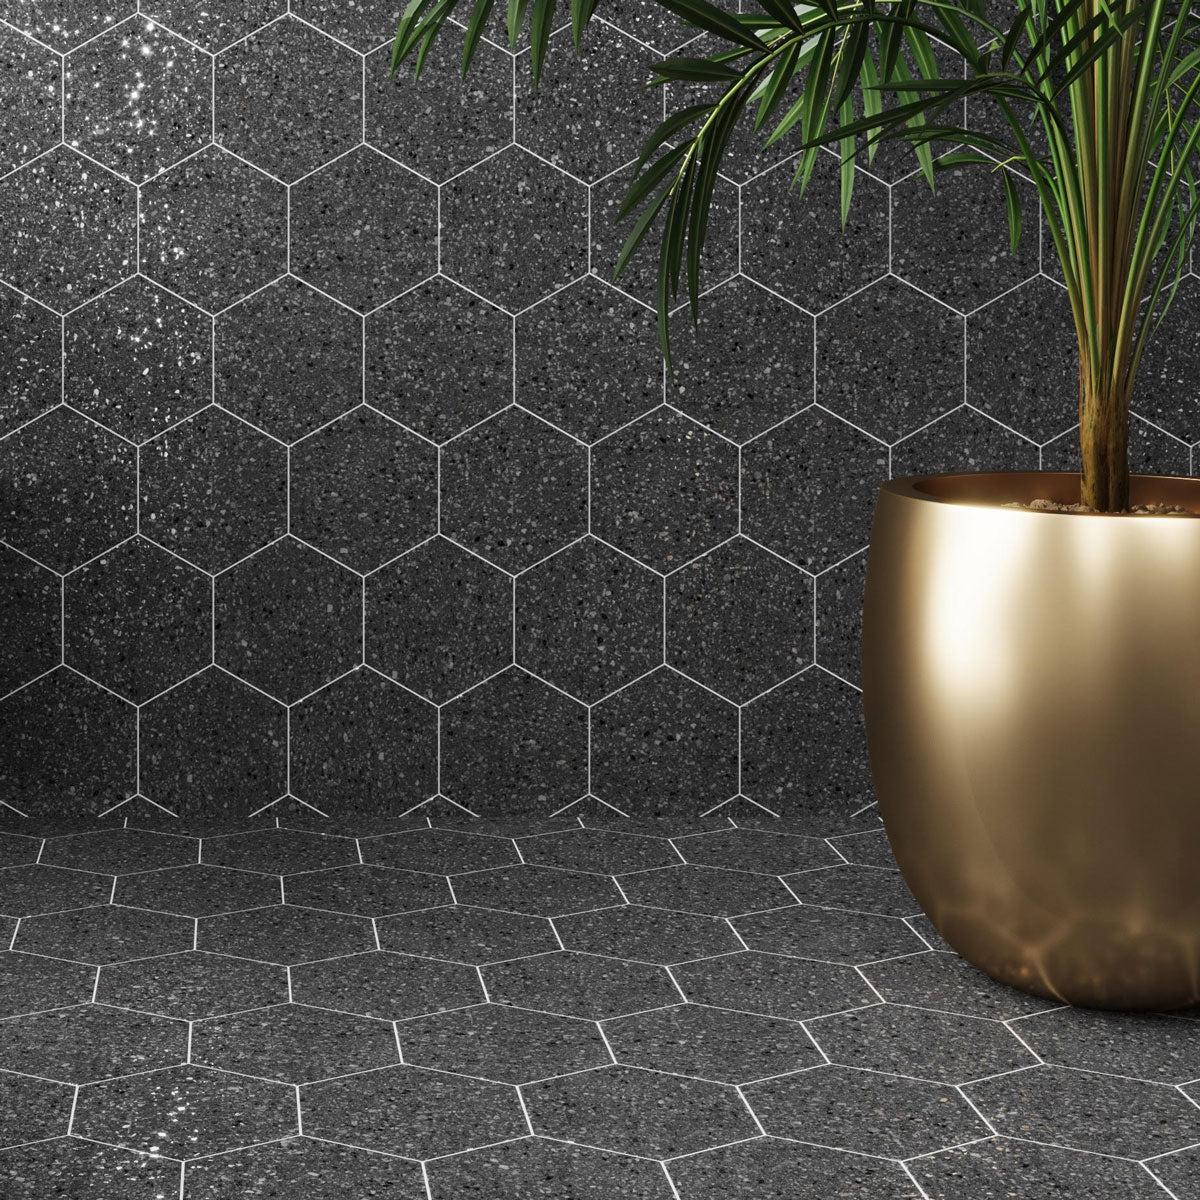 Graphite Gray Terrazzo Hex Porcelain Tile  Online Tile Store with Free  Shipping on Qualifying Orders